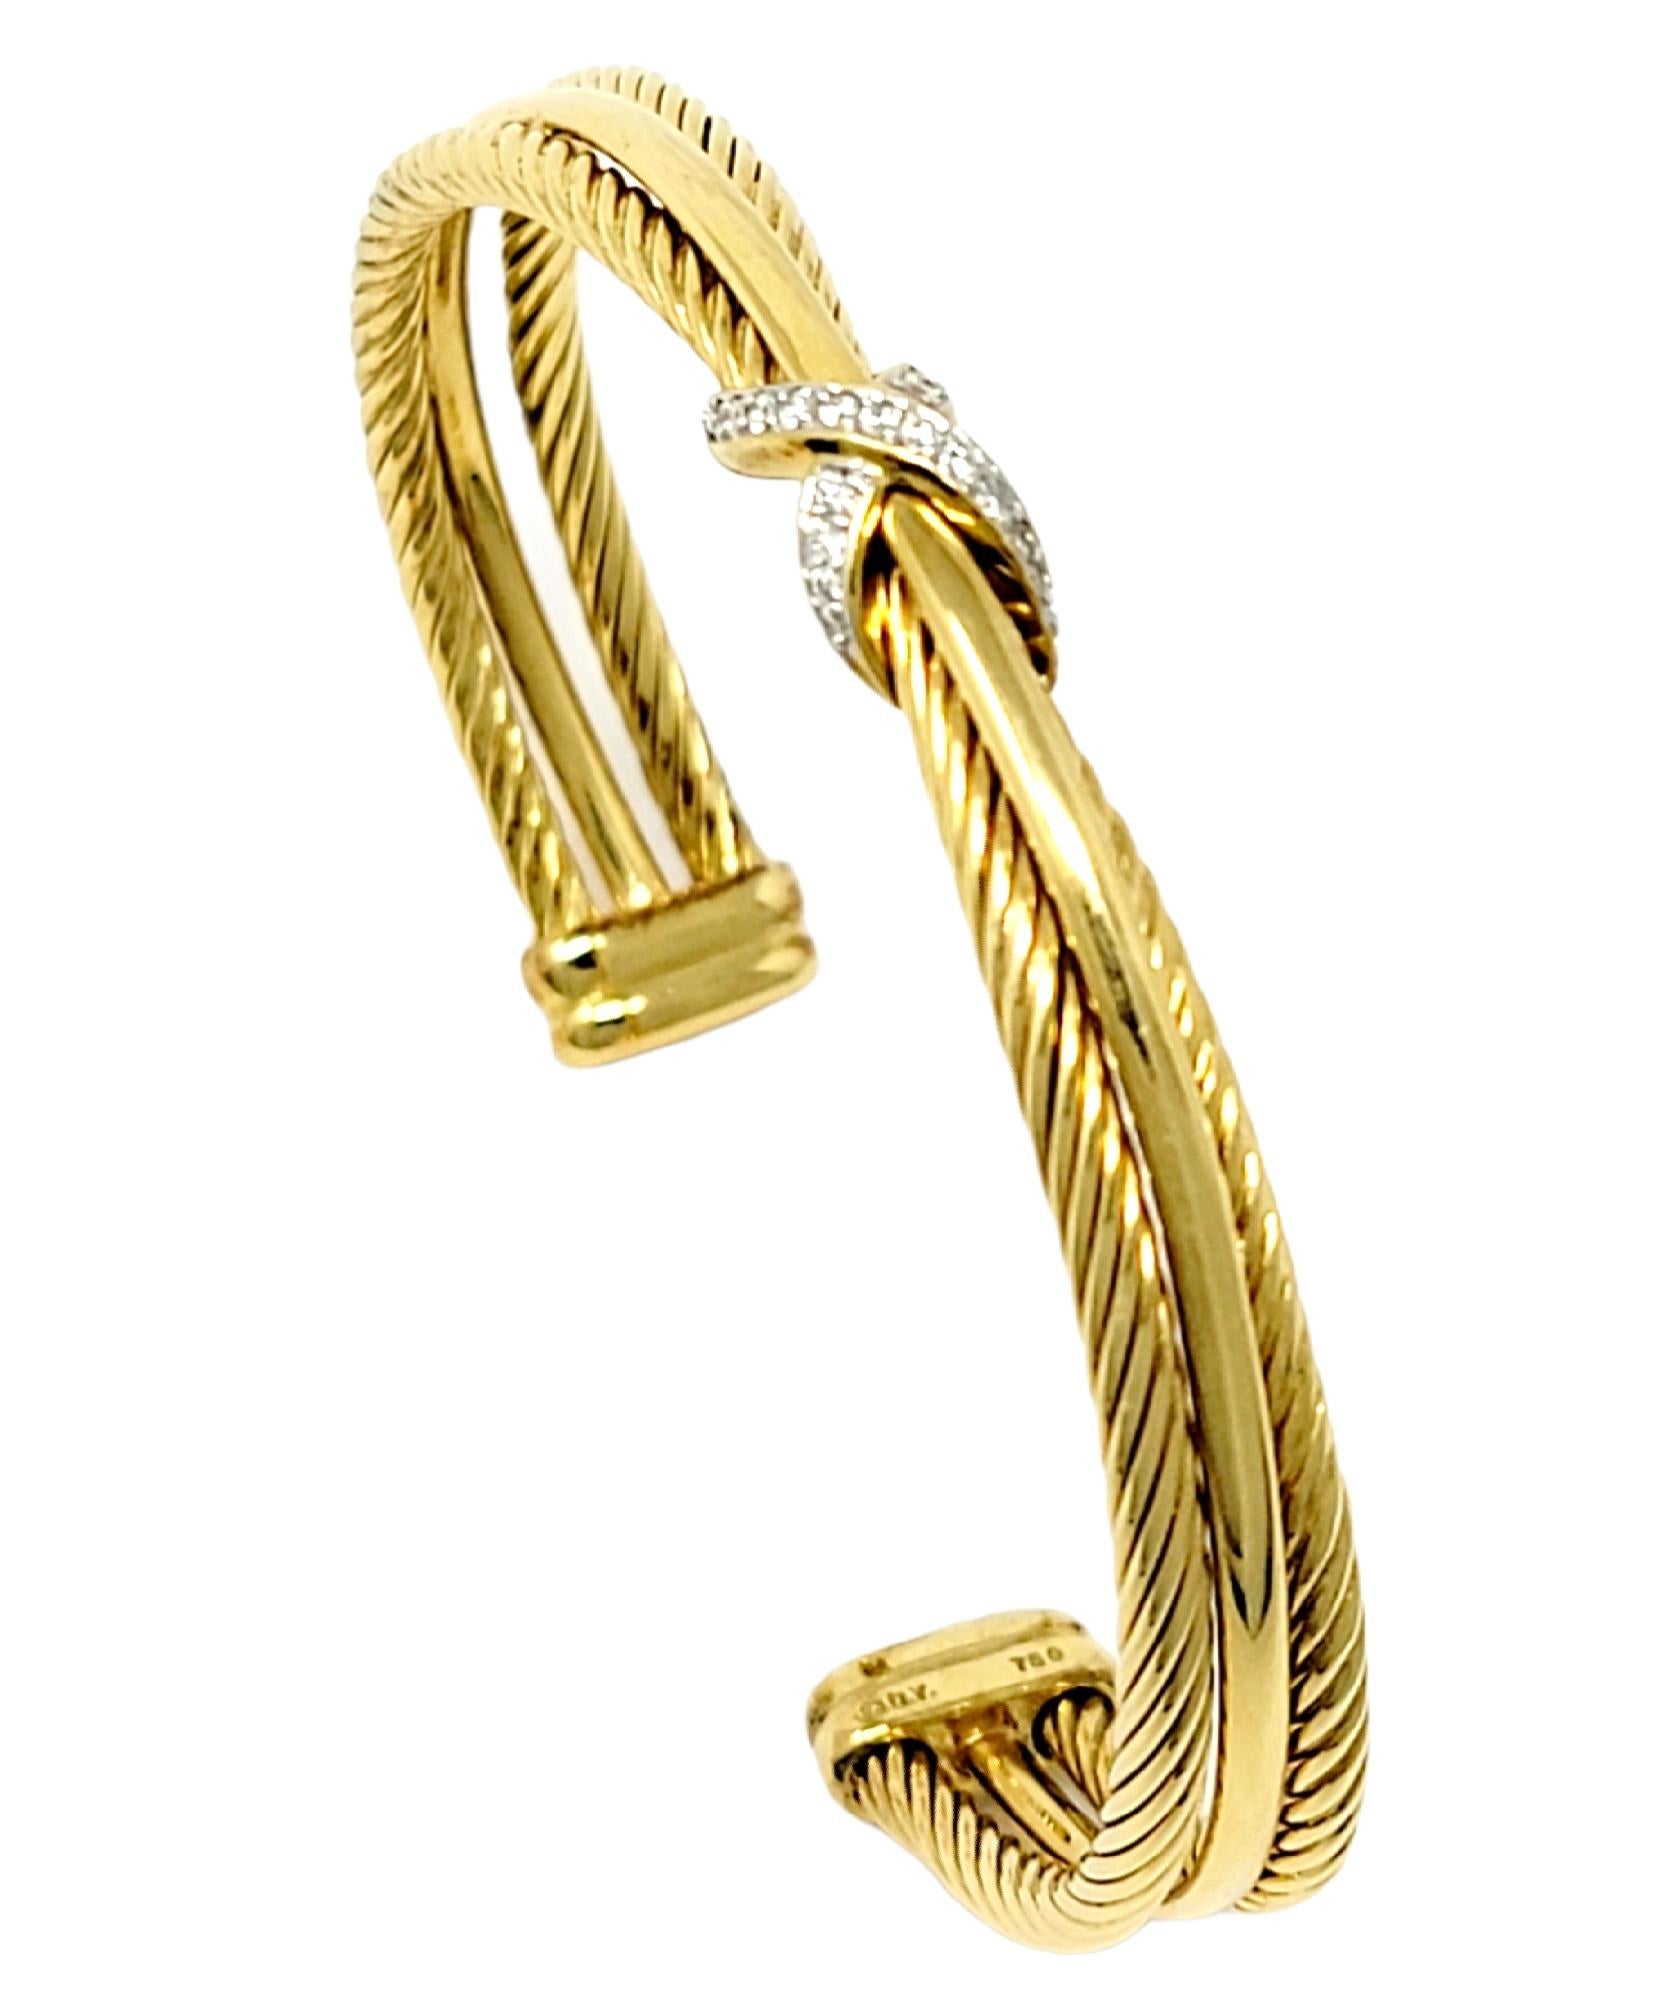 David Yurman Diamond Crossover X Cable Cuff Bracelet in 18 Karat Yellow Gold In Good Condition For Sale In Scottsdale, AZ